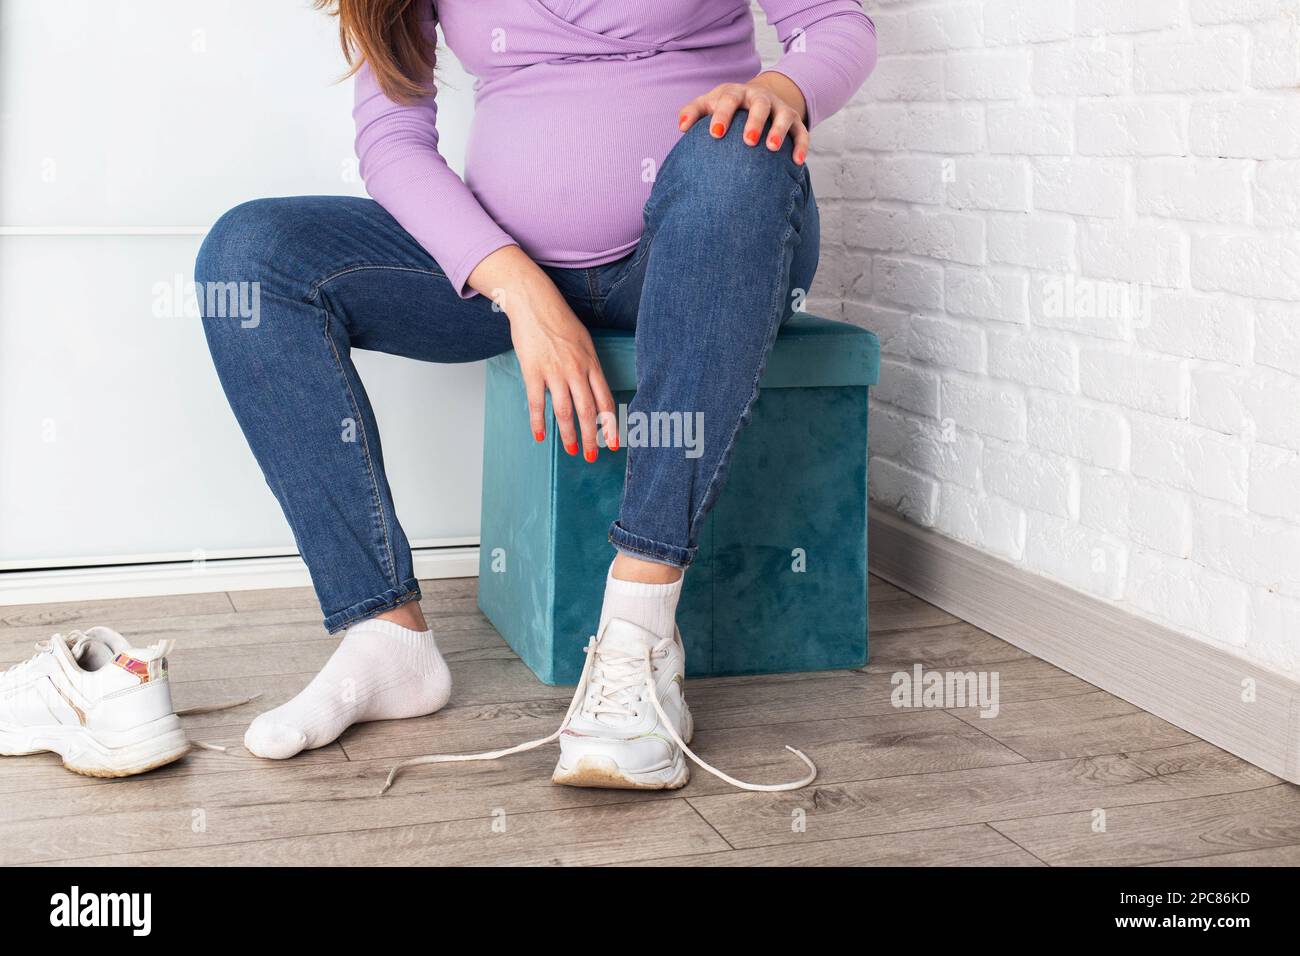 A pregnant girl with a big belly puts on sneakers on her feet. The concept of discomfort and inconvenience when bending over and putting on shoes. Con Stock Photo